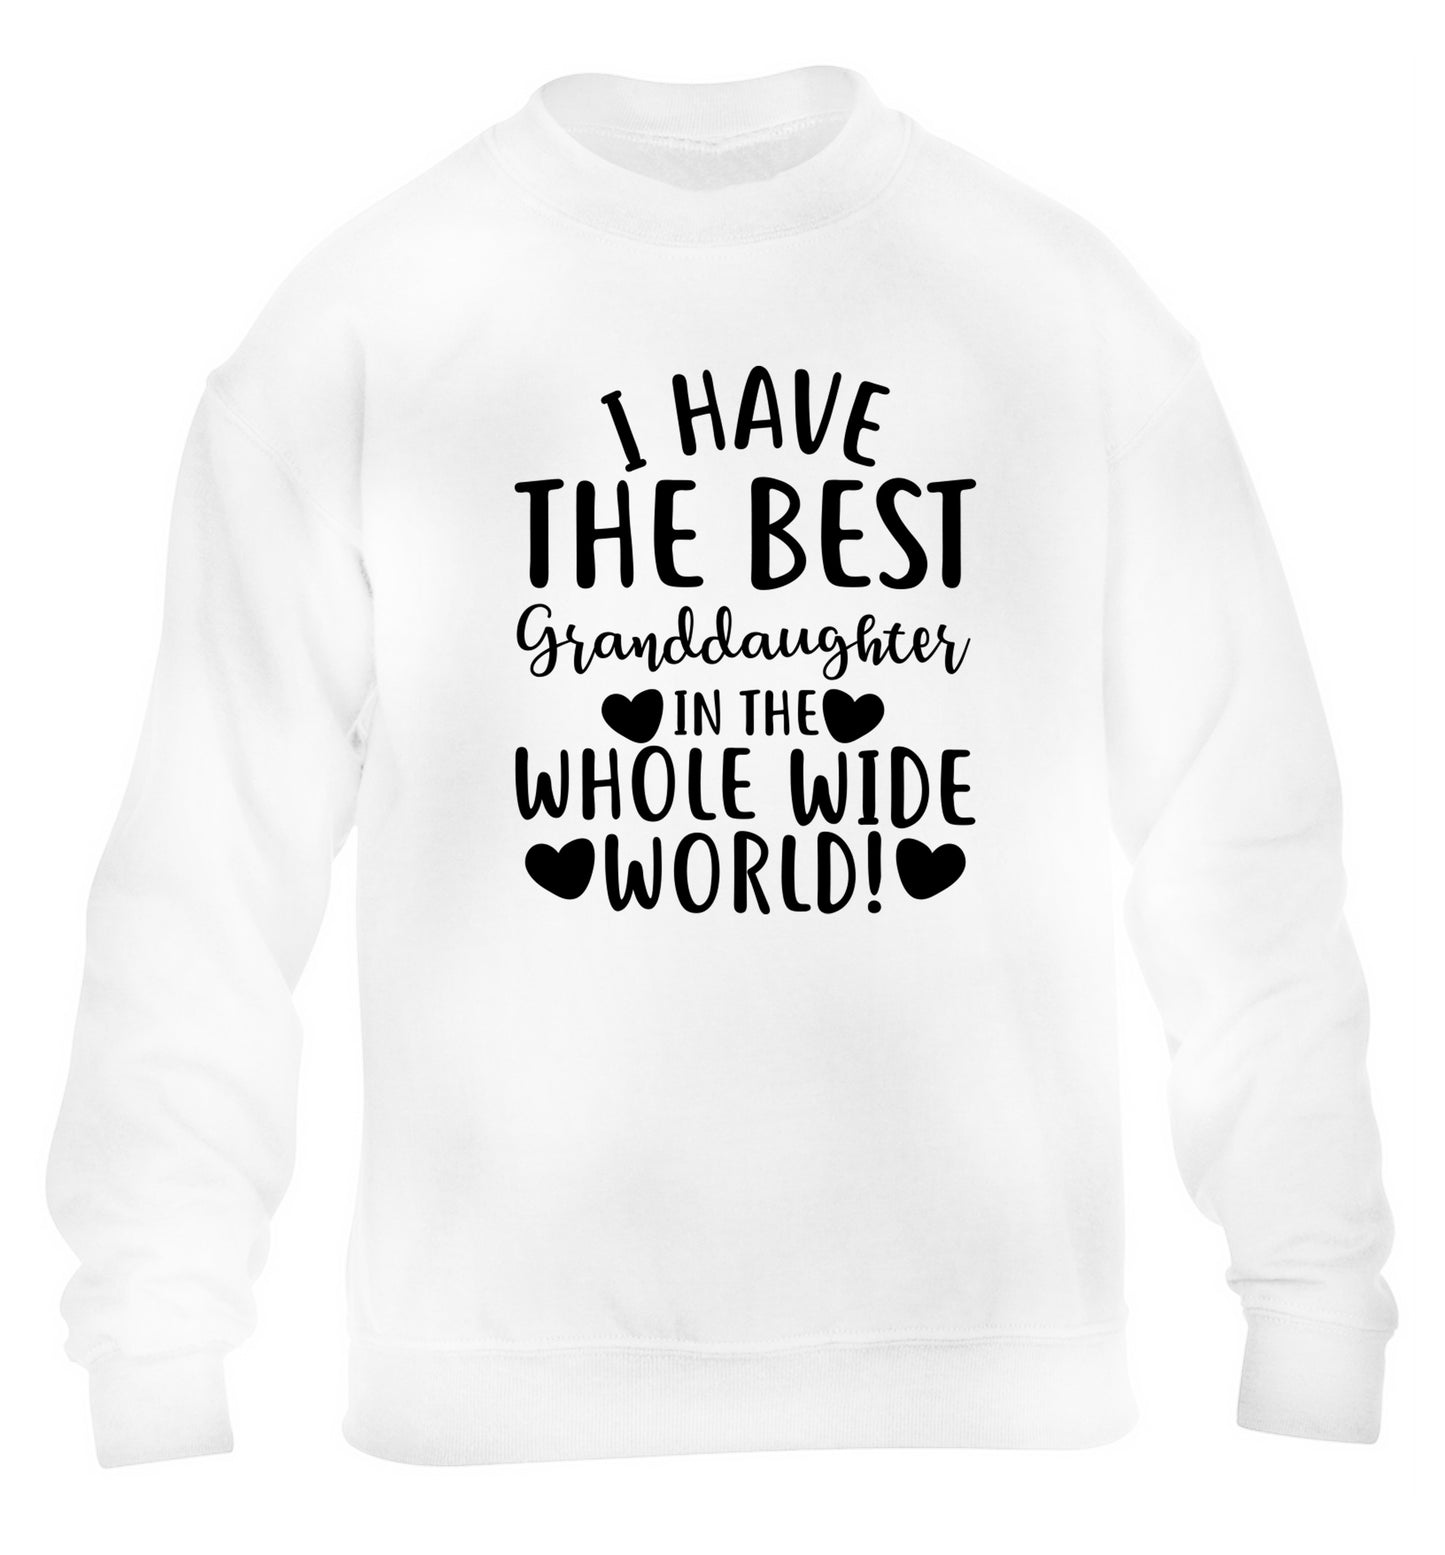 I have the best granddaughter in the whole wide world! children's white sweater 12-13 Years